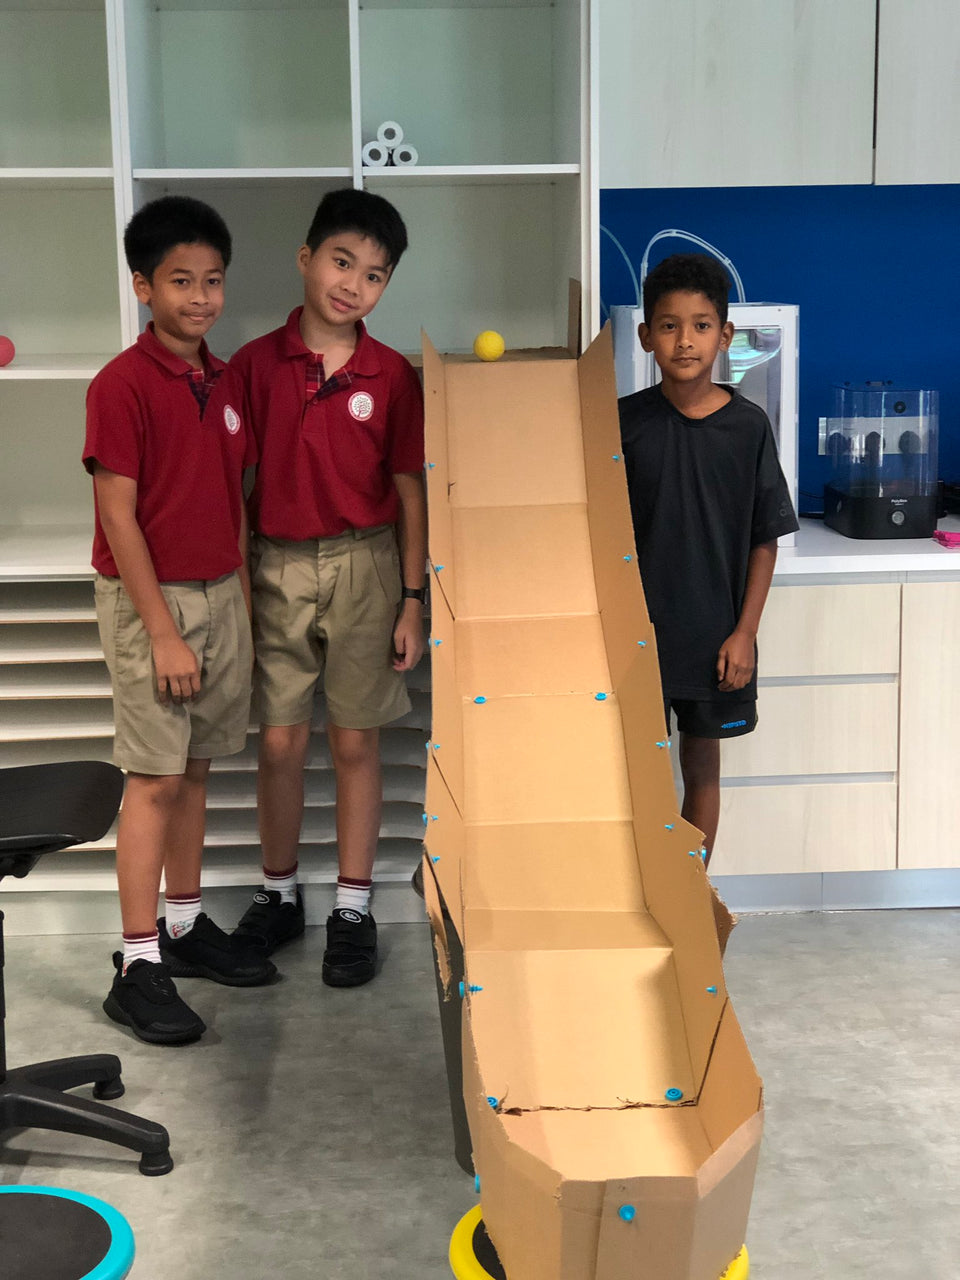 Cardboard ramps for Dash robots made using cardboard and Makedo construction system.